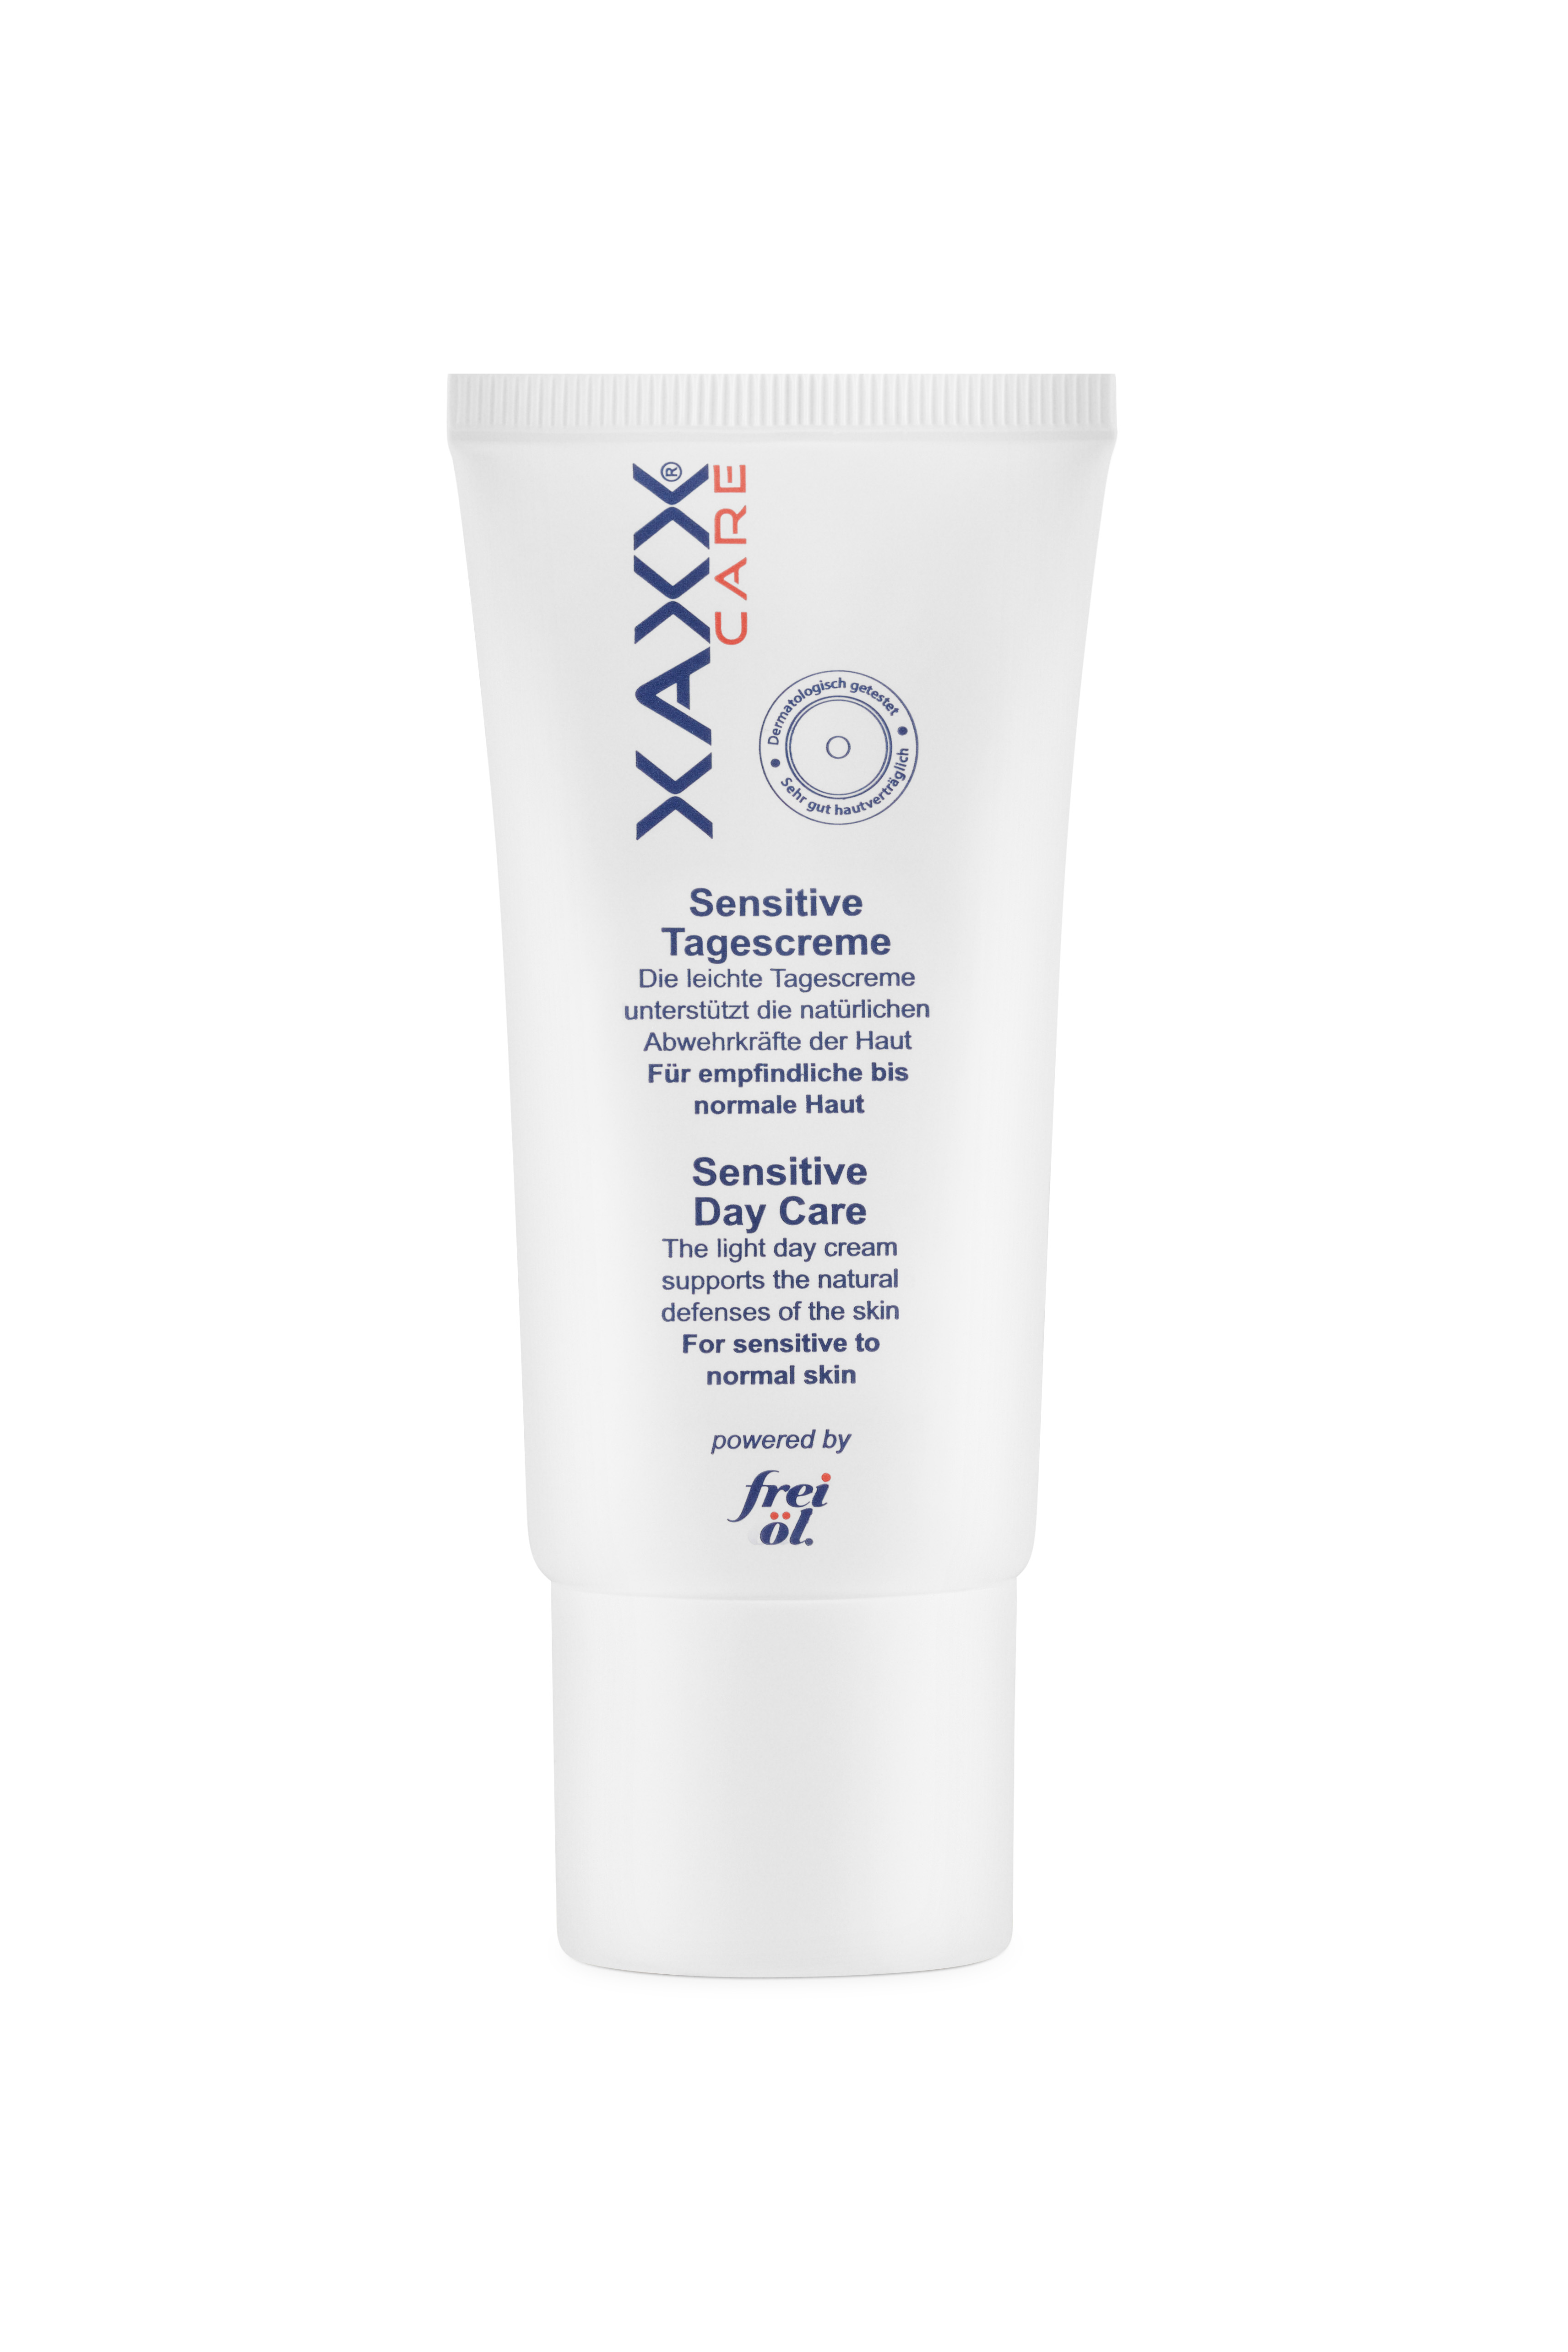 Sensitive Day Care Tagescreme 50 ml xaxx powered by Frei oel